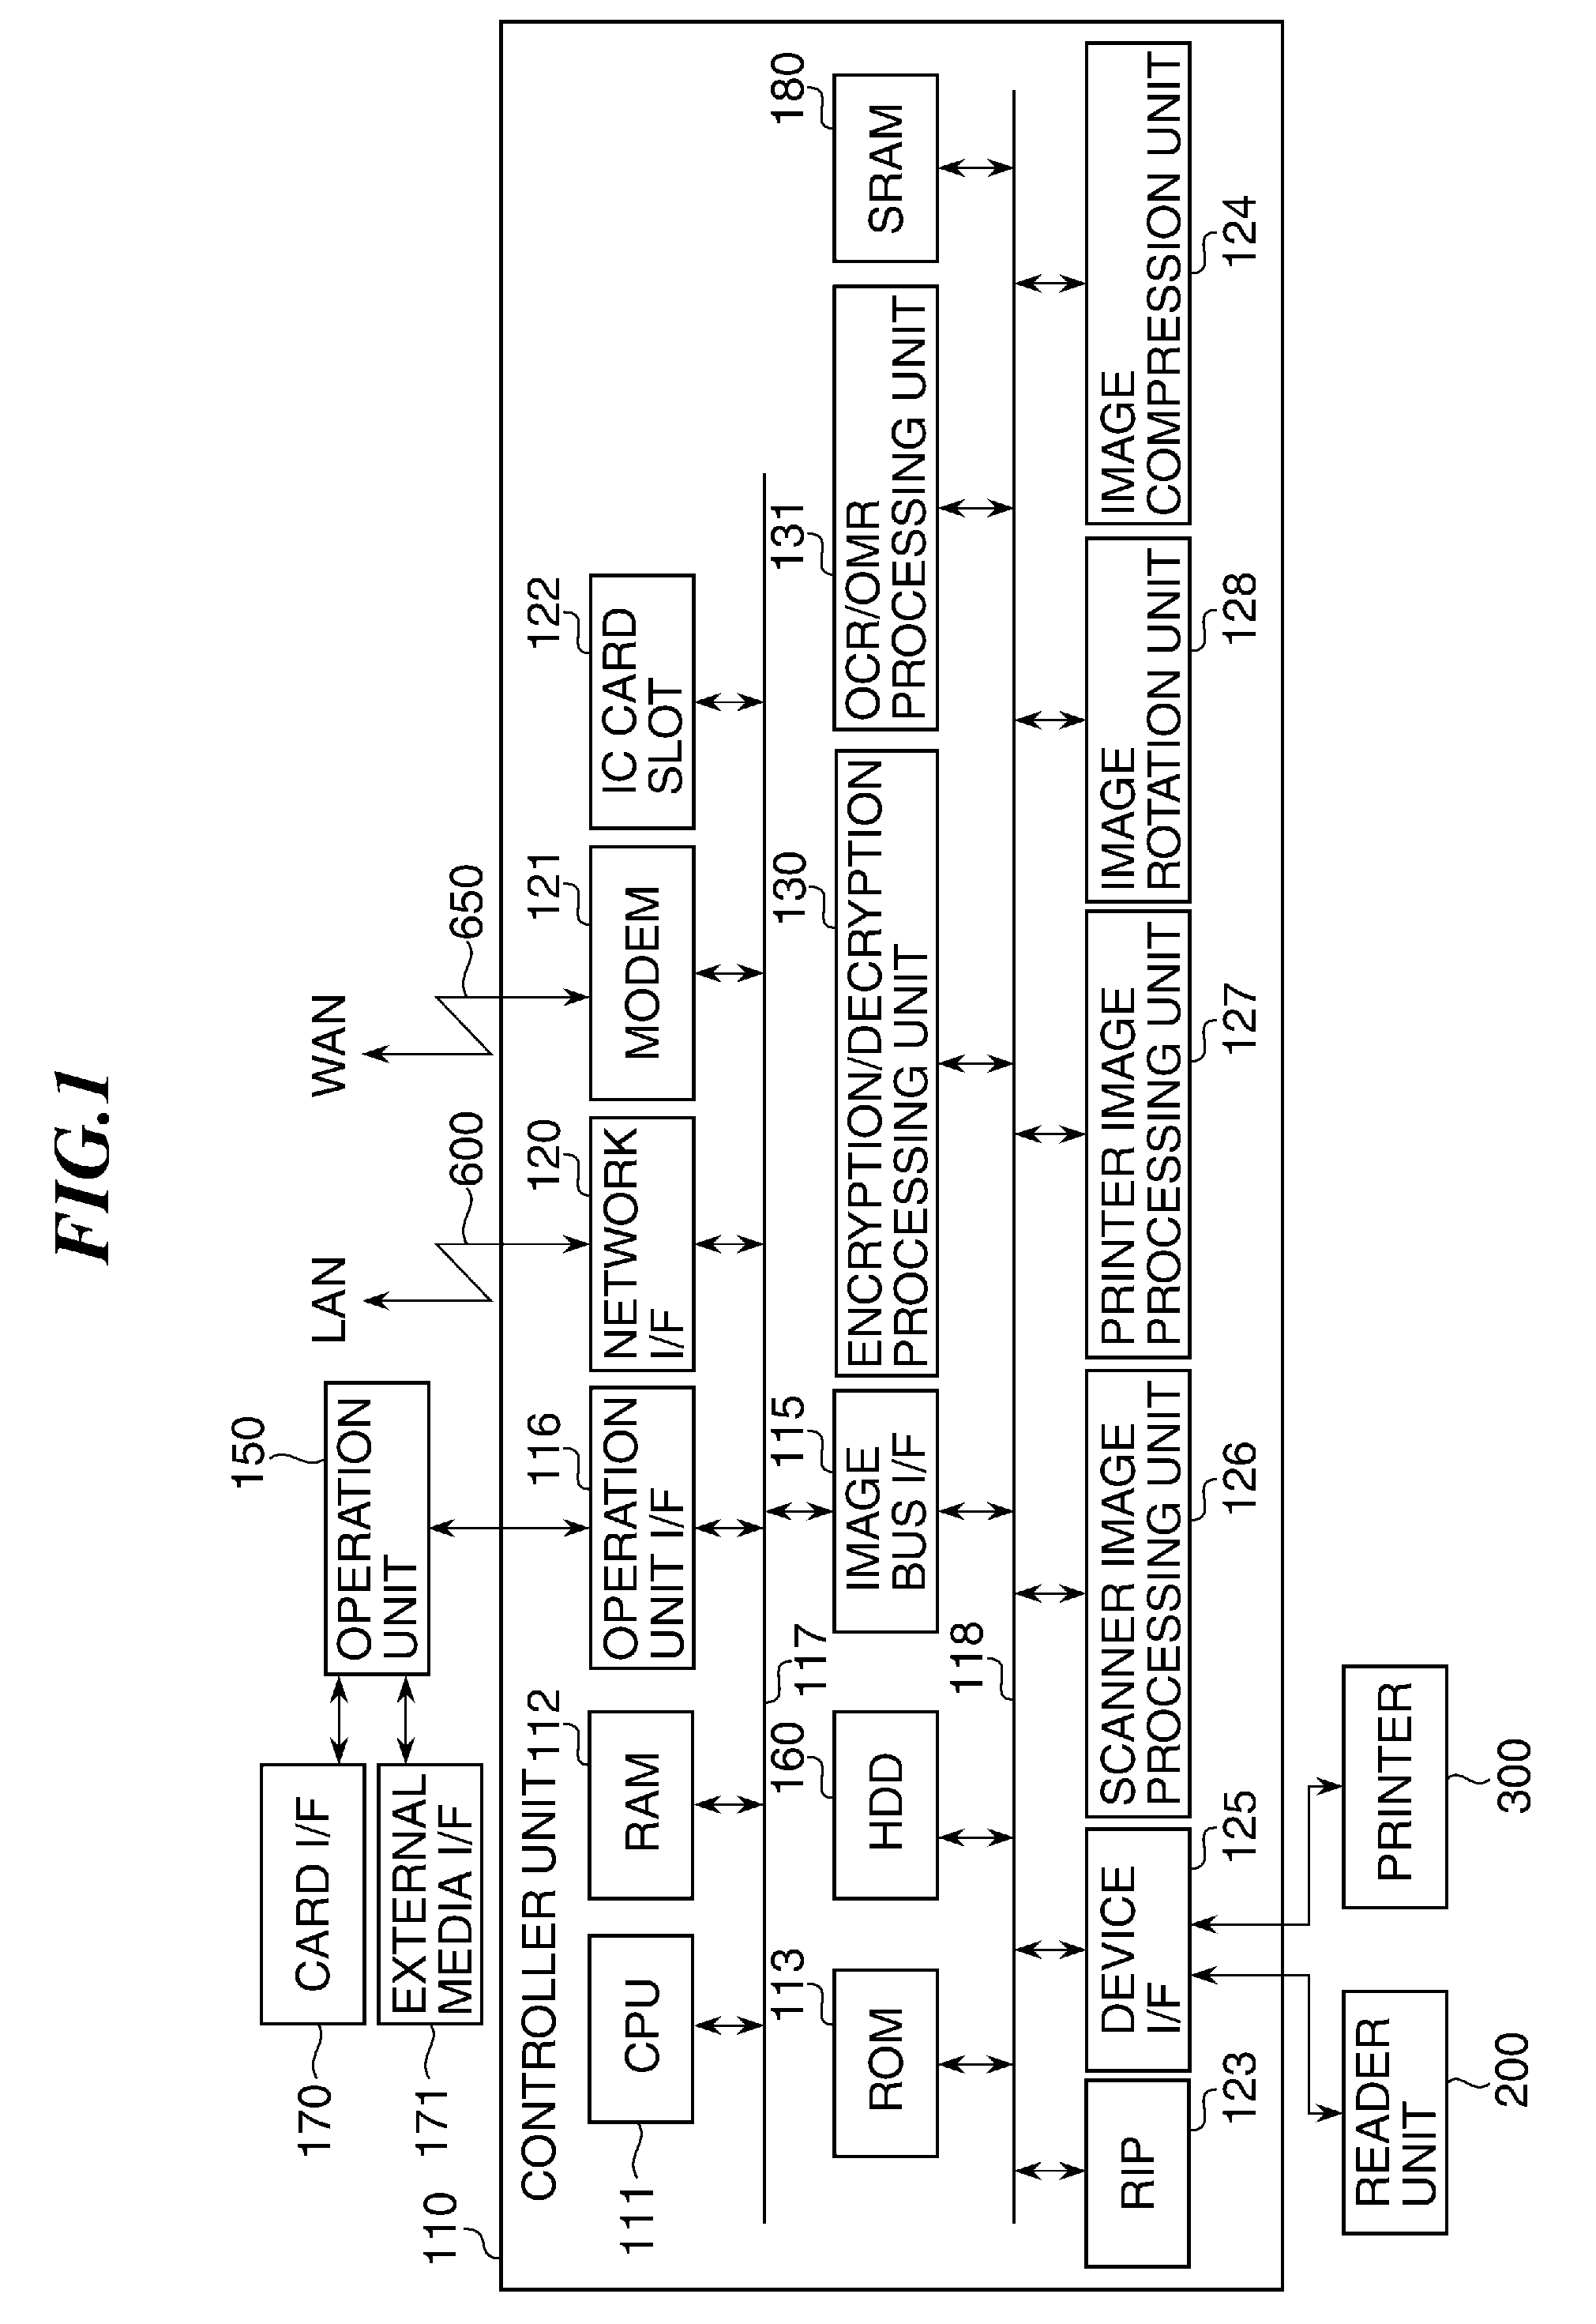 Information processing apparatus that records logs, and control method and storage medium therefor